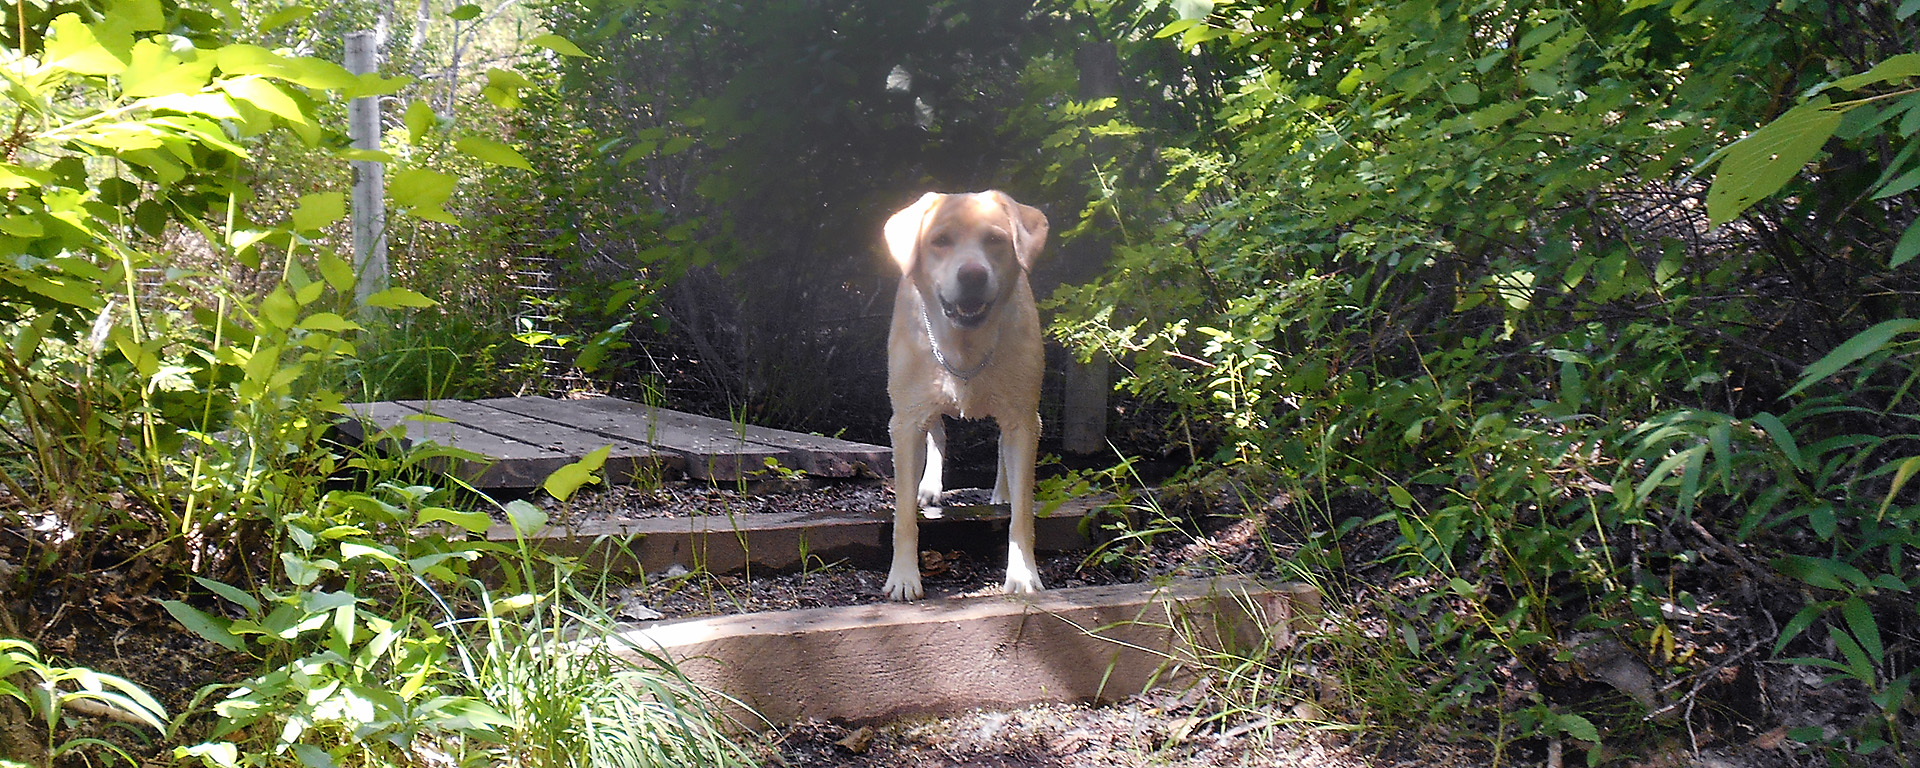 A tan dog standing on stone steps surrounded by plants. Photo courtesy Shannonbrook Boarding Kennels 